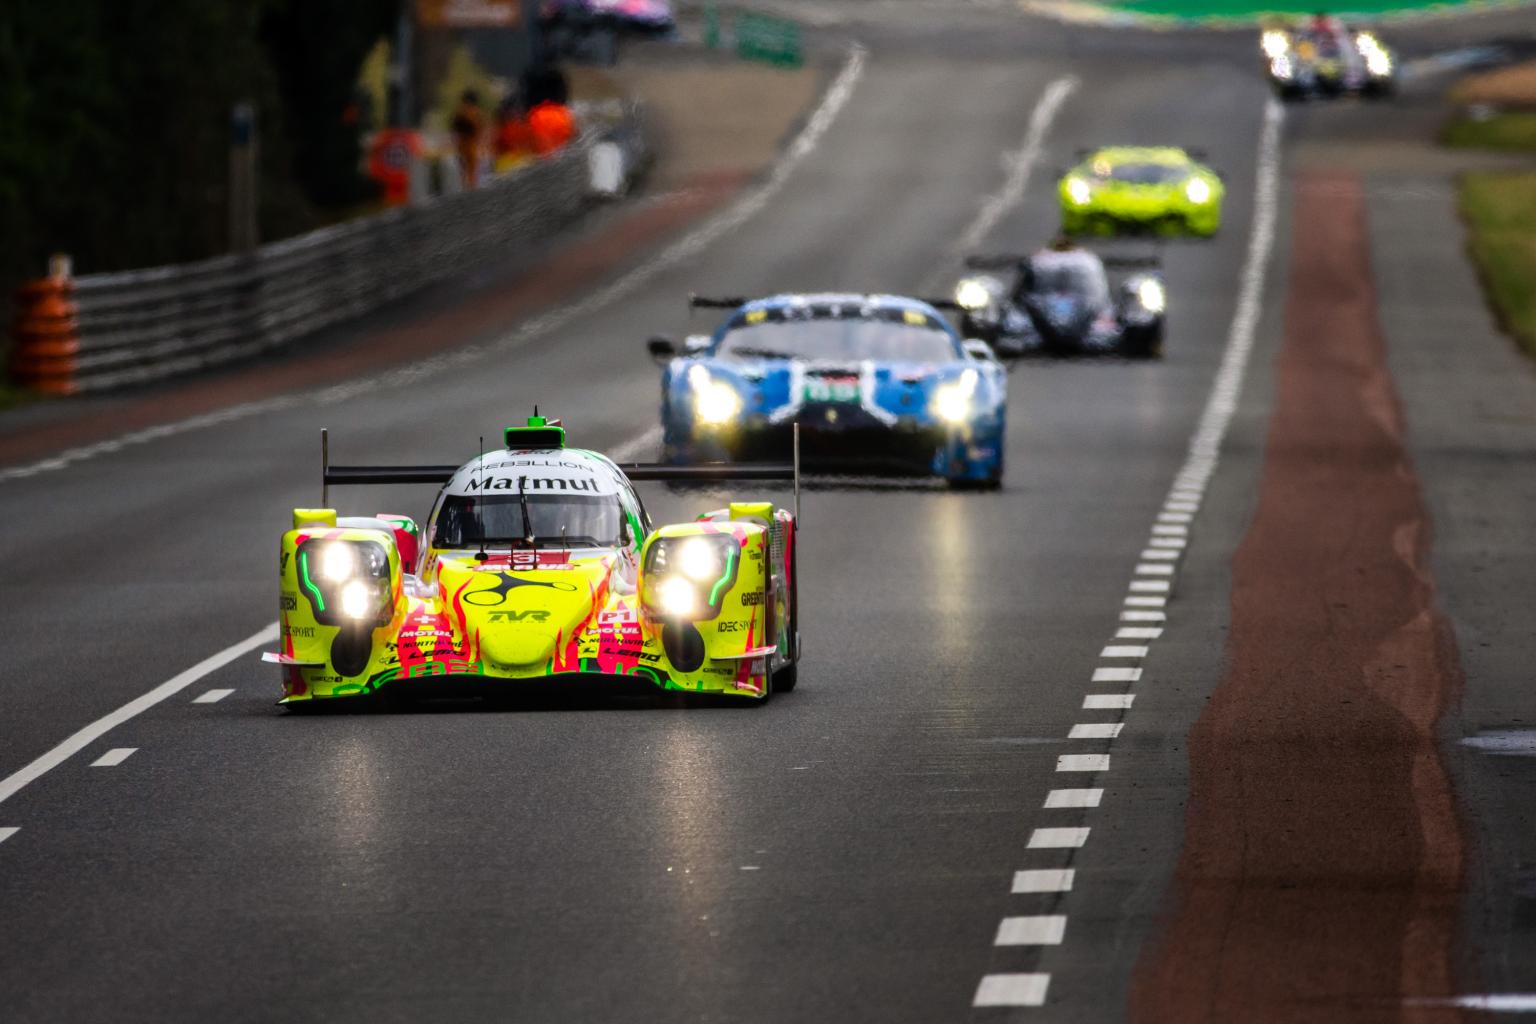 #3 Rebellion at LeMans this year